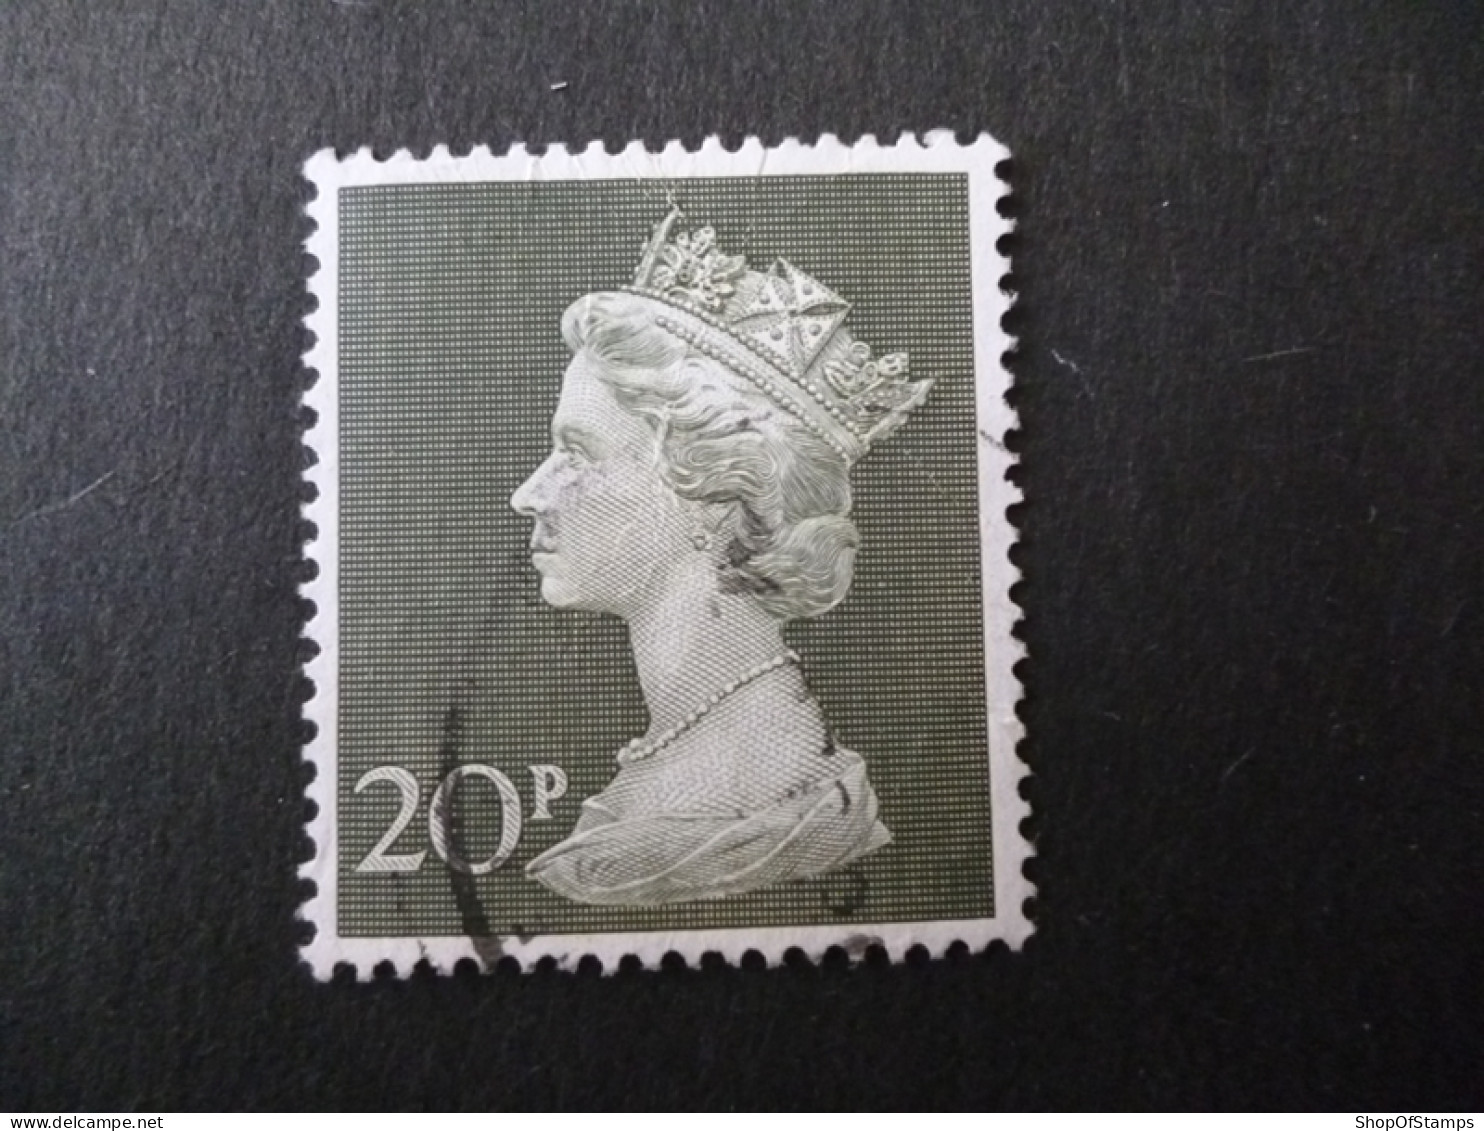 GREAT BRITAIN SG 730 3 USED STAMPS - Maschinenstempel (EMA)